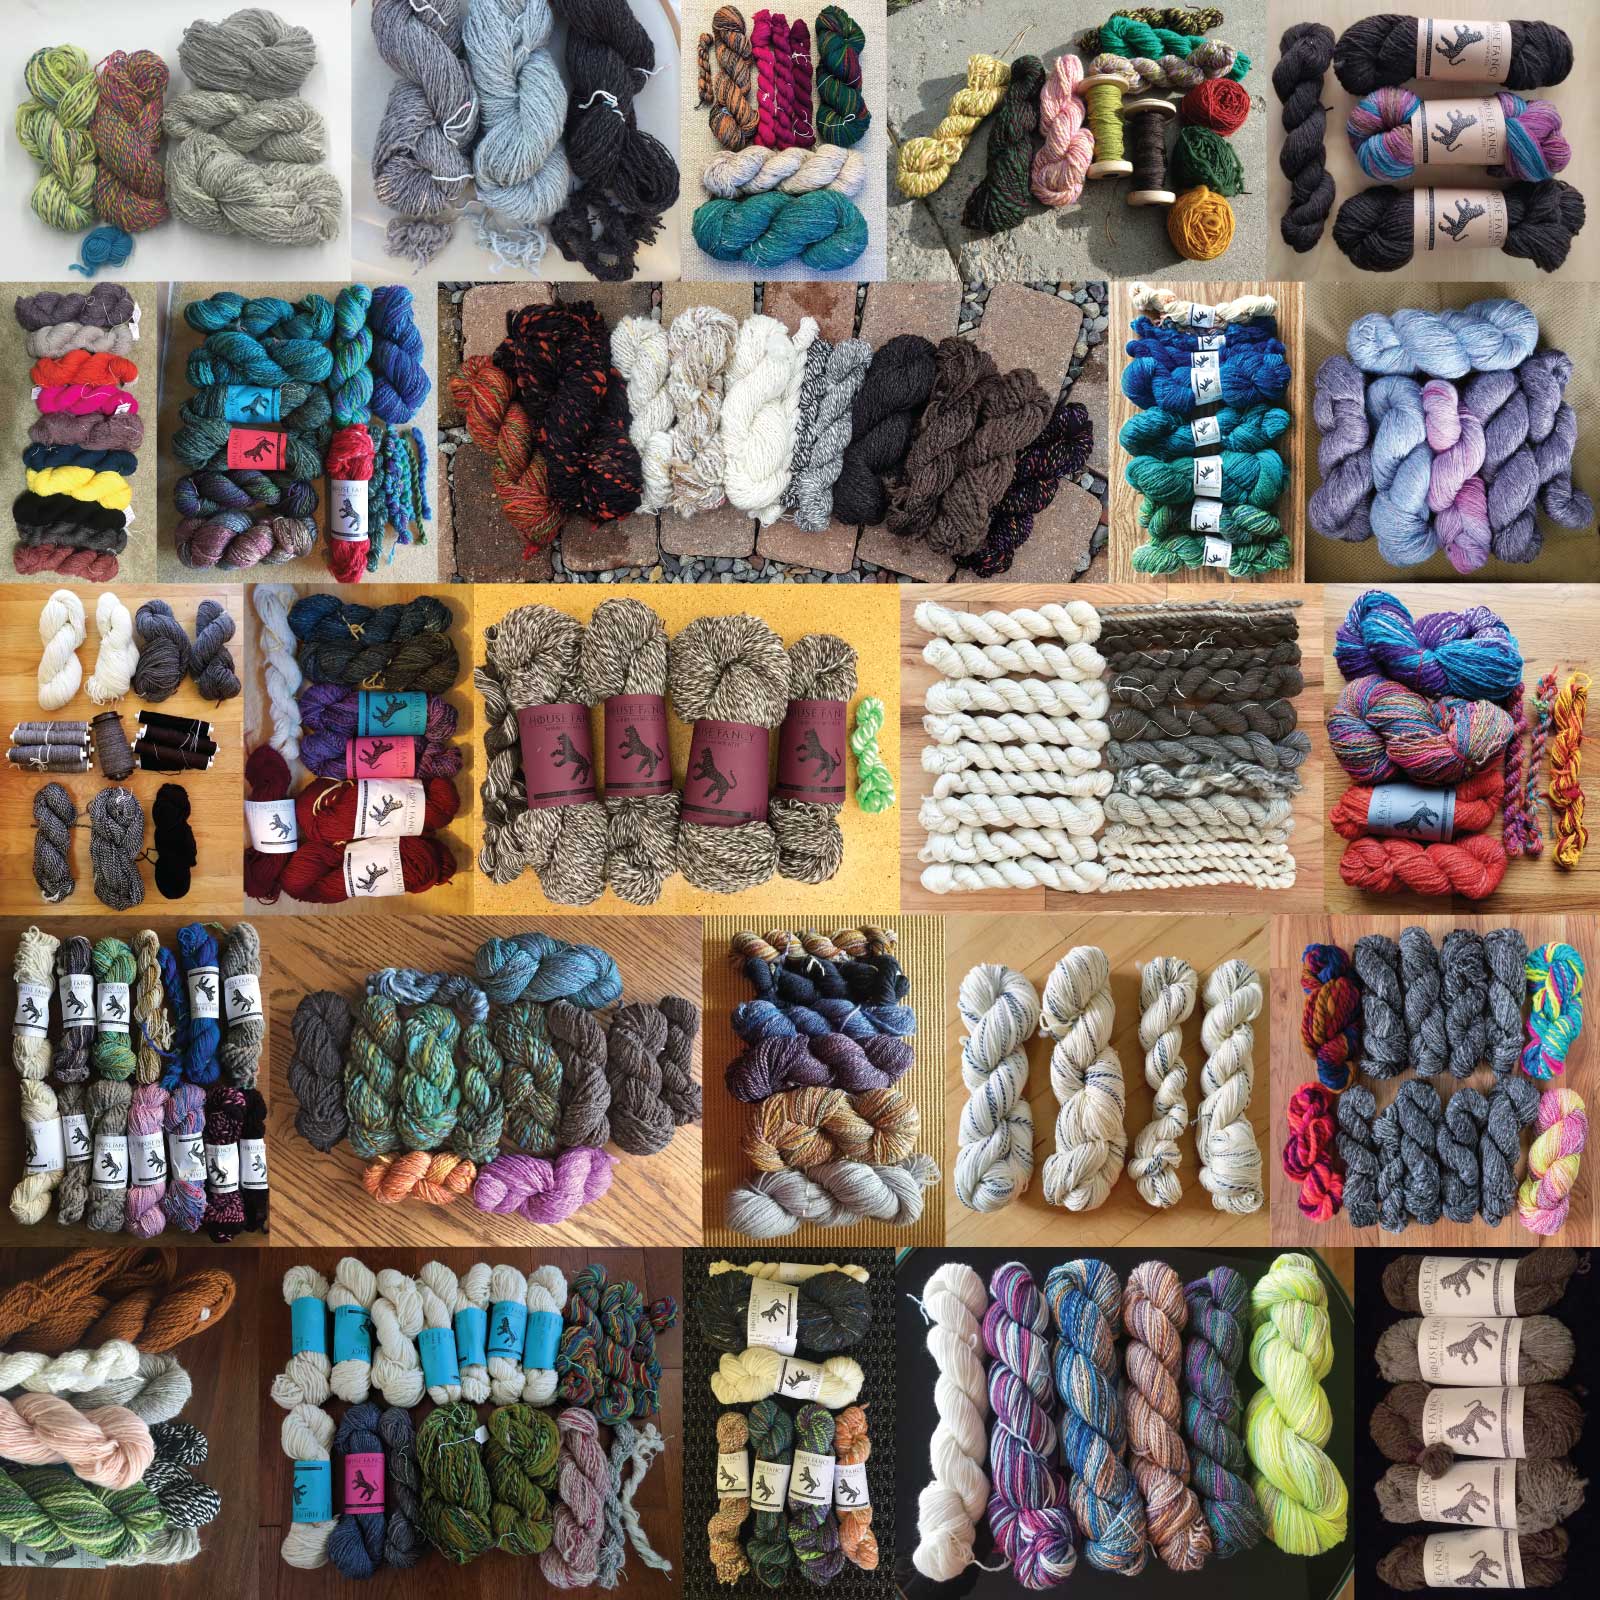 A collage of all Team Fancy Tiger's spinzilla yarn - 124648 yards!